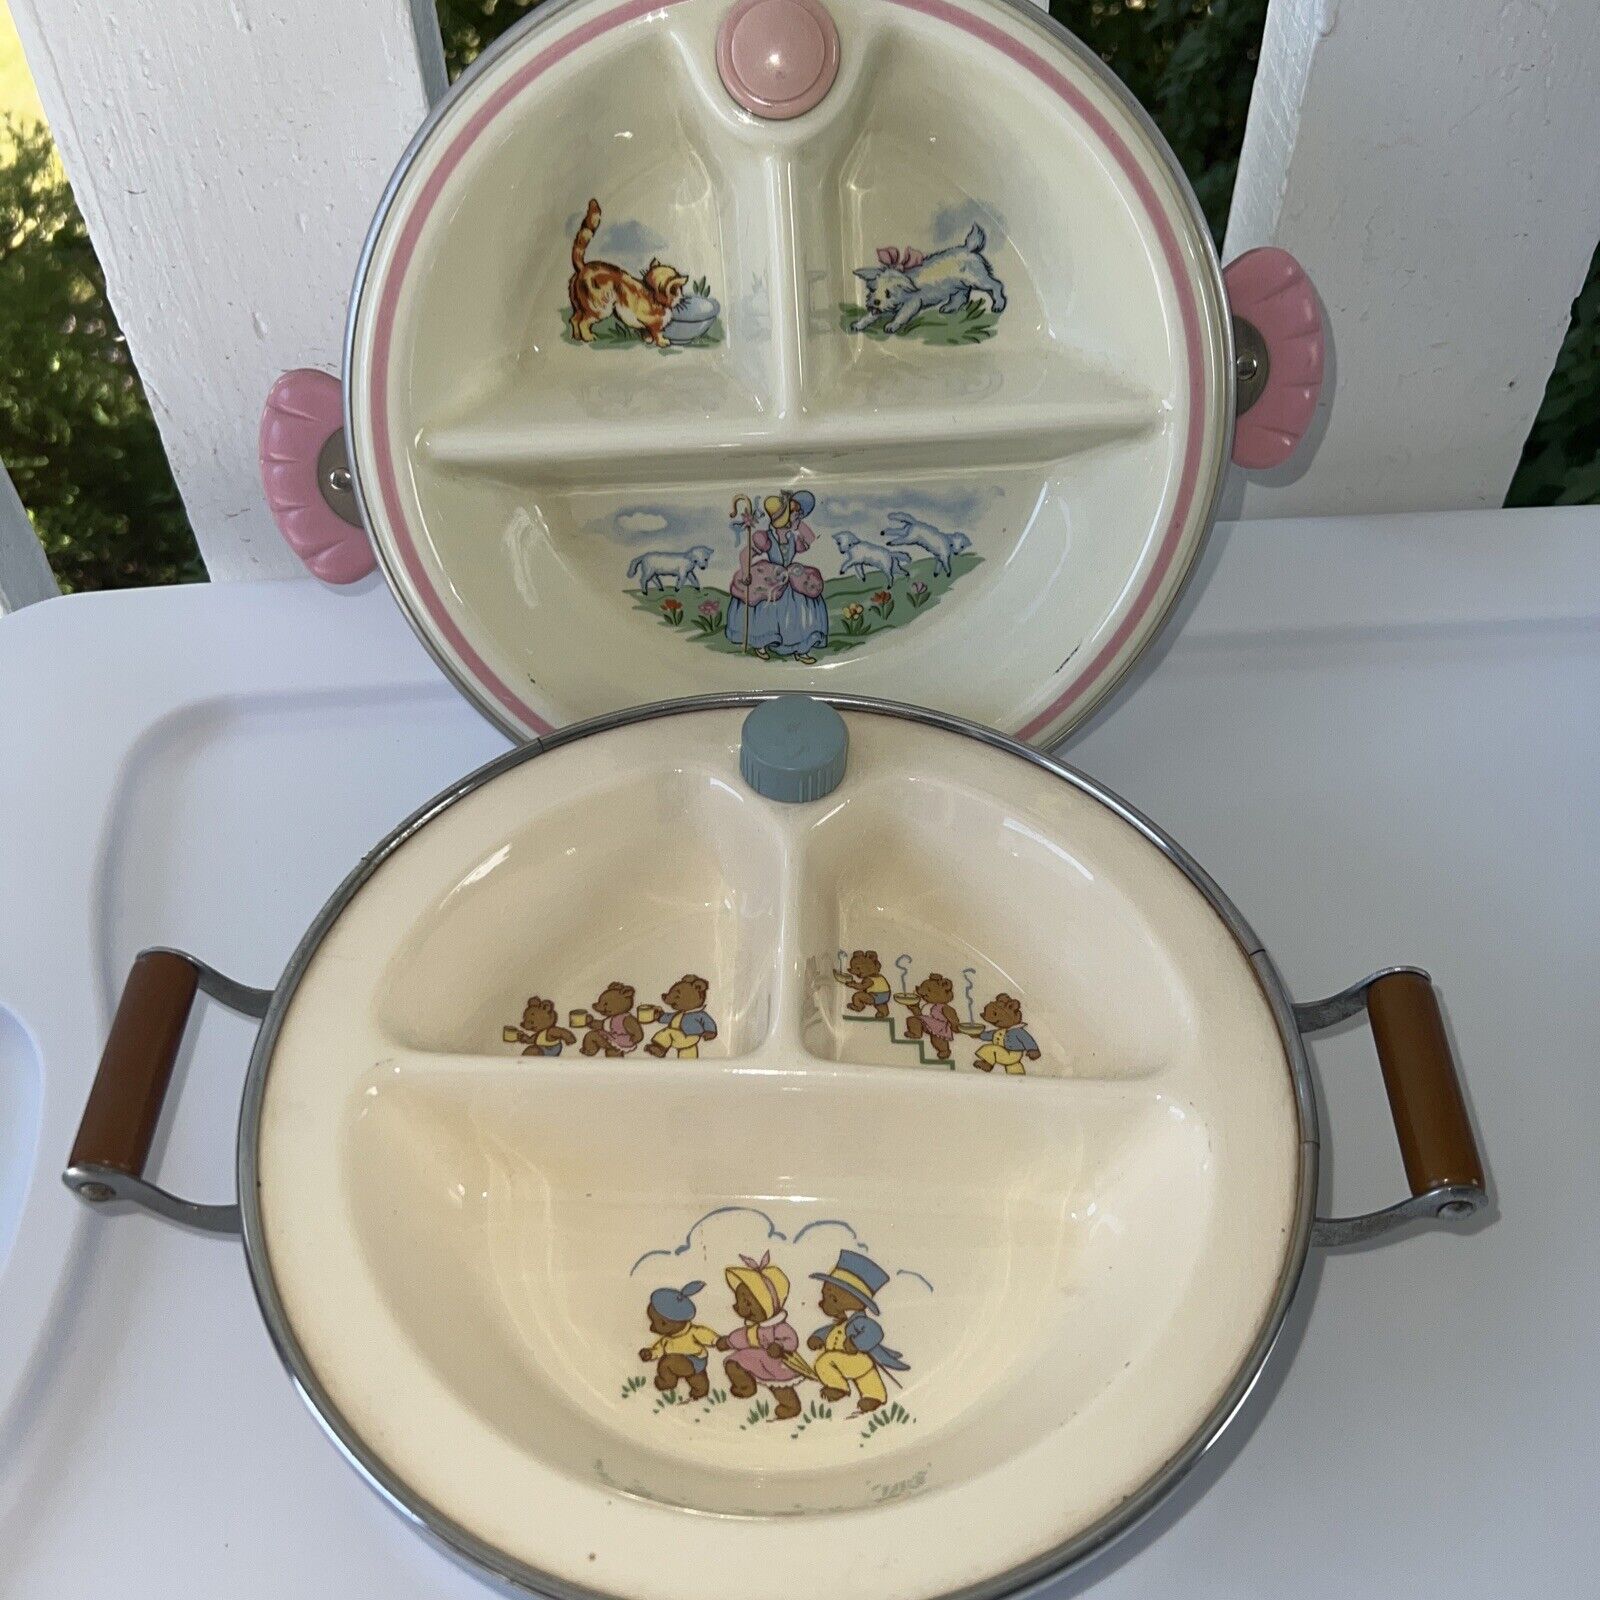 2 Childrens Warming Plates W/ Little Bo Peep And 3 Little Bears